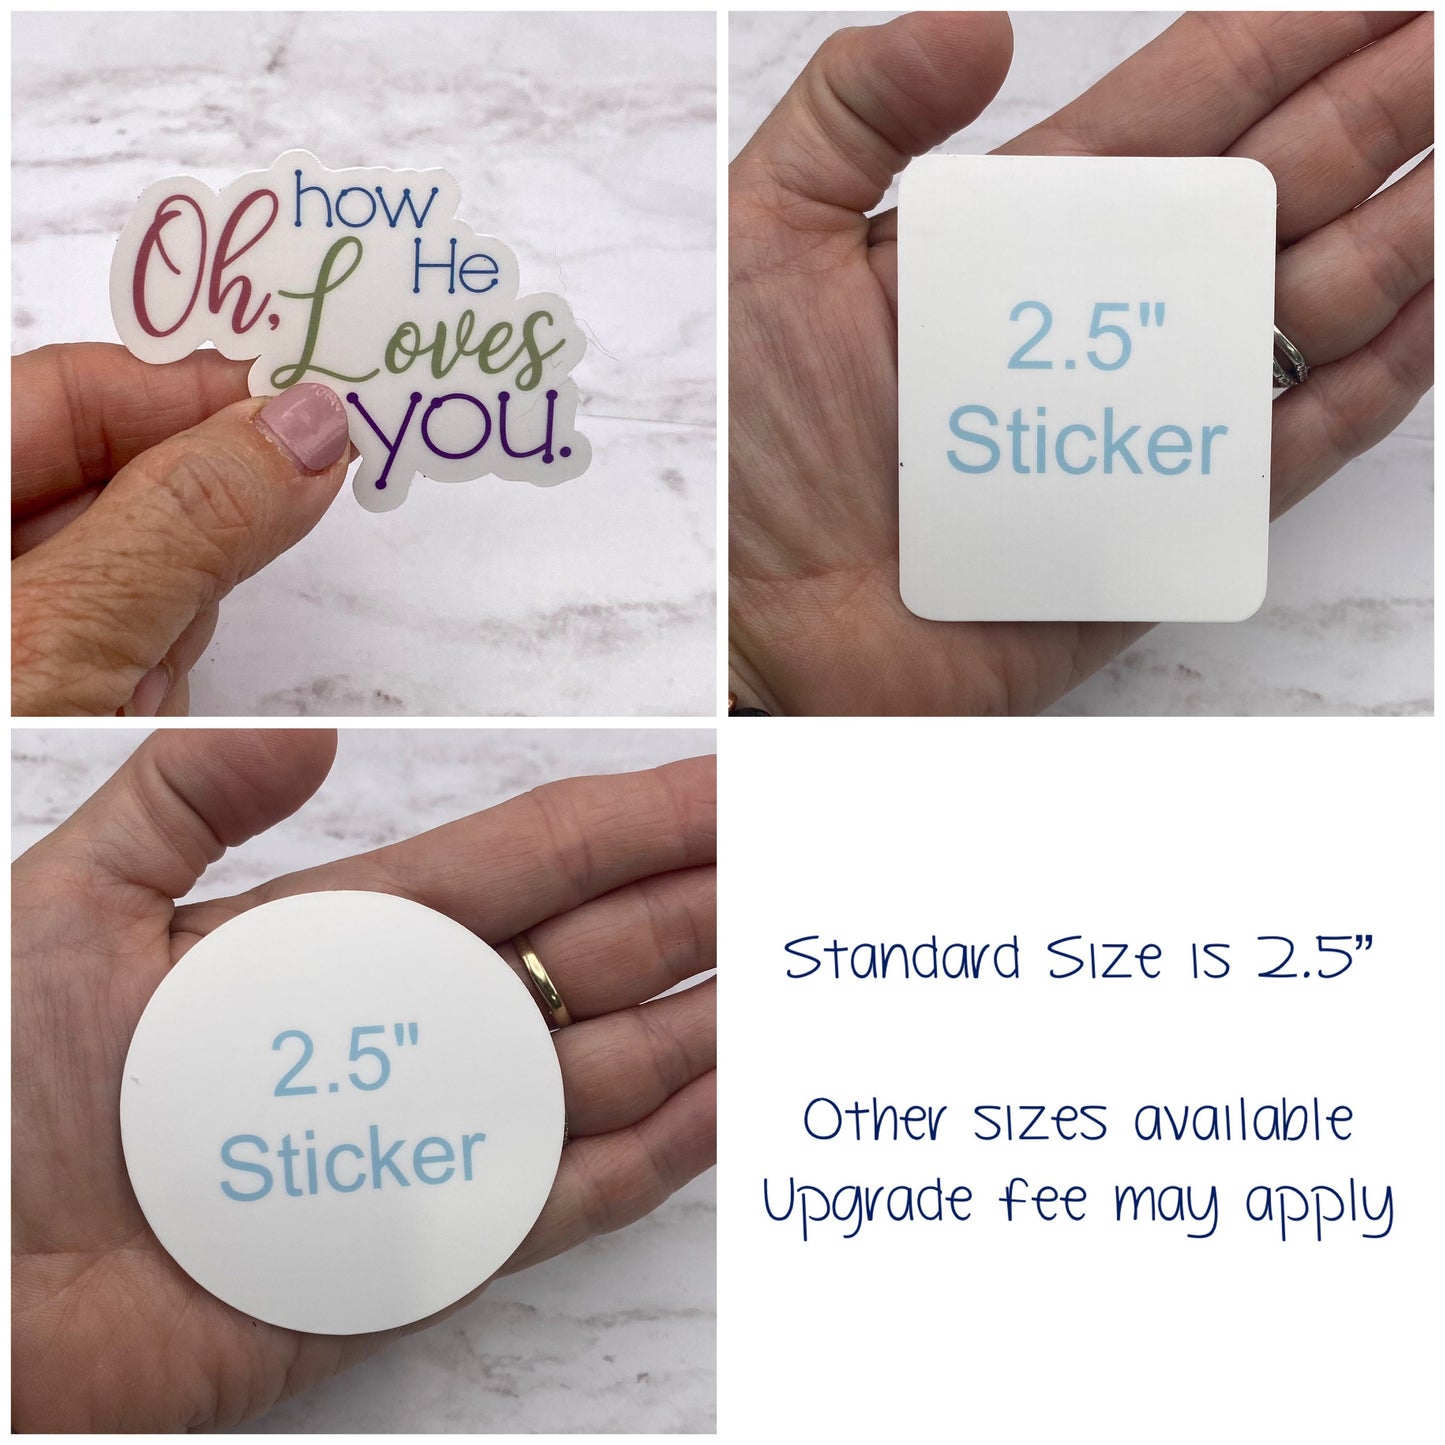 Love one Another - lavender - UV/ Waterproof Vinyl Sticker/ Decal- Choice of Size, Single or Bulk quantities